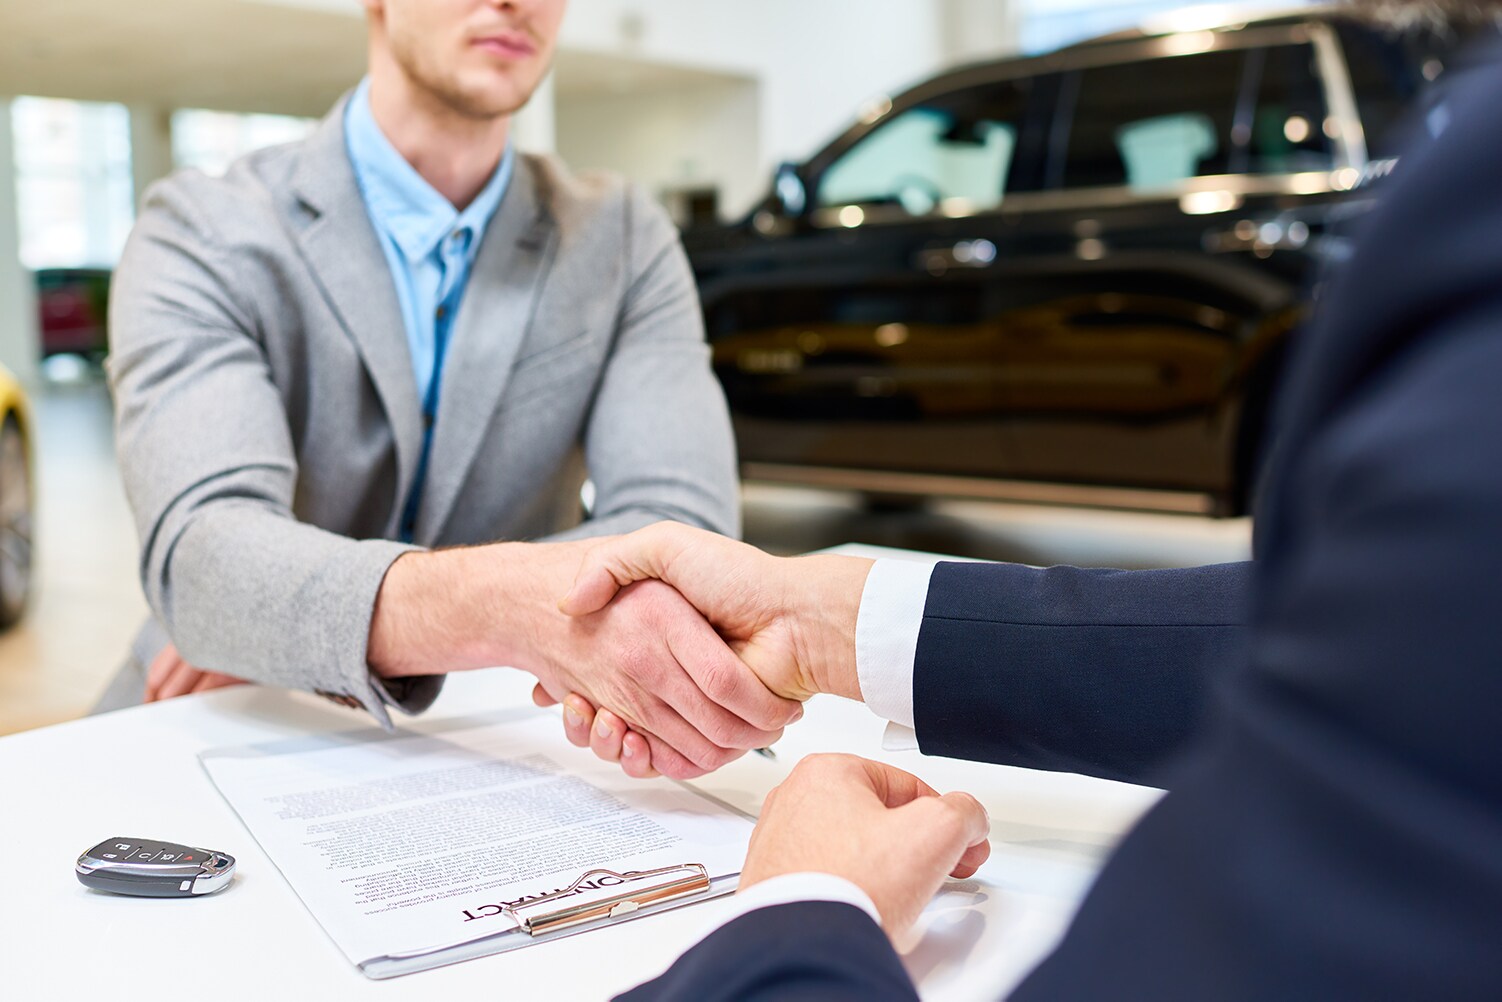 Lincoln of New Bern is a Car Dealership in New Bern near Neuse Forest, NC | Lincoln financial advisor shaking hands with customer at sales desk